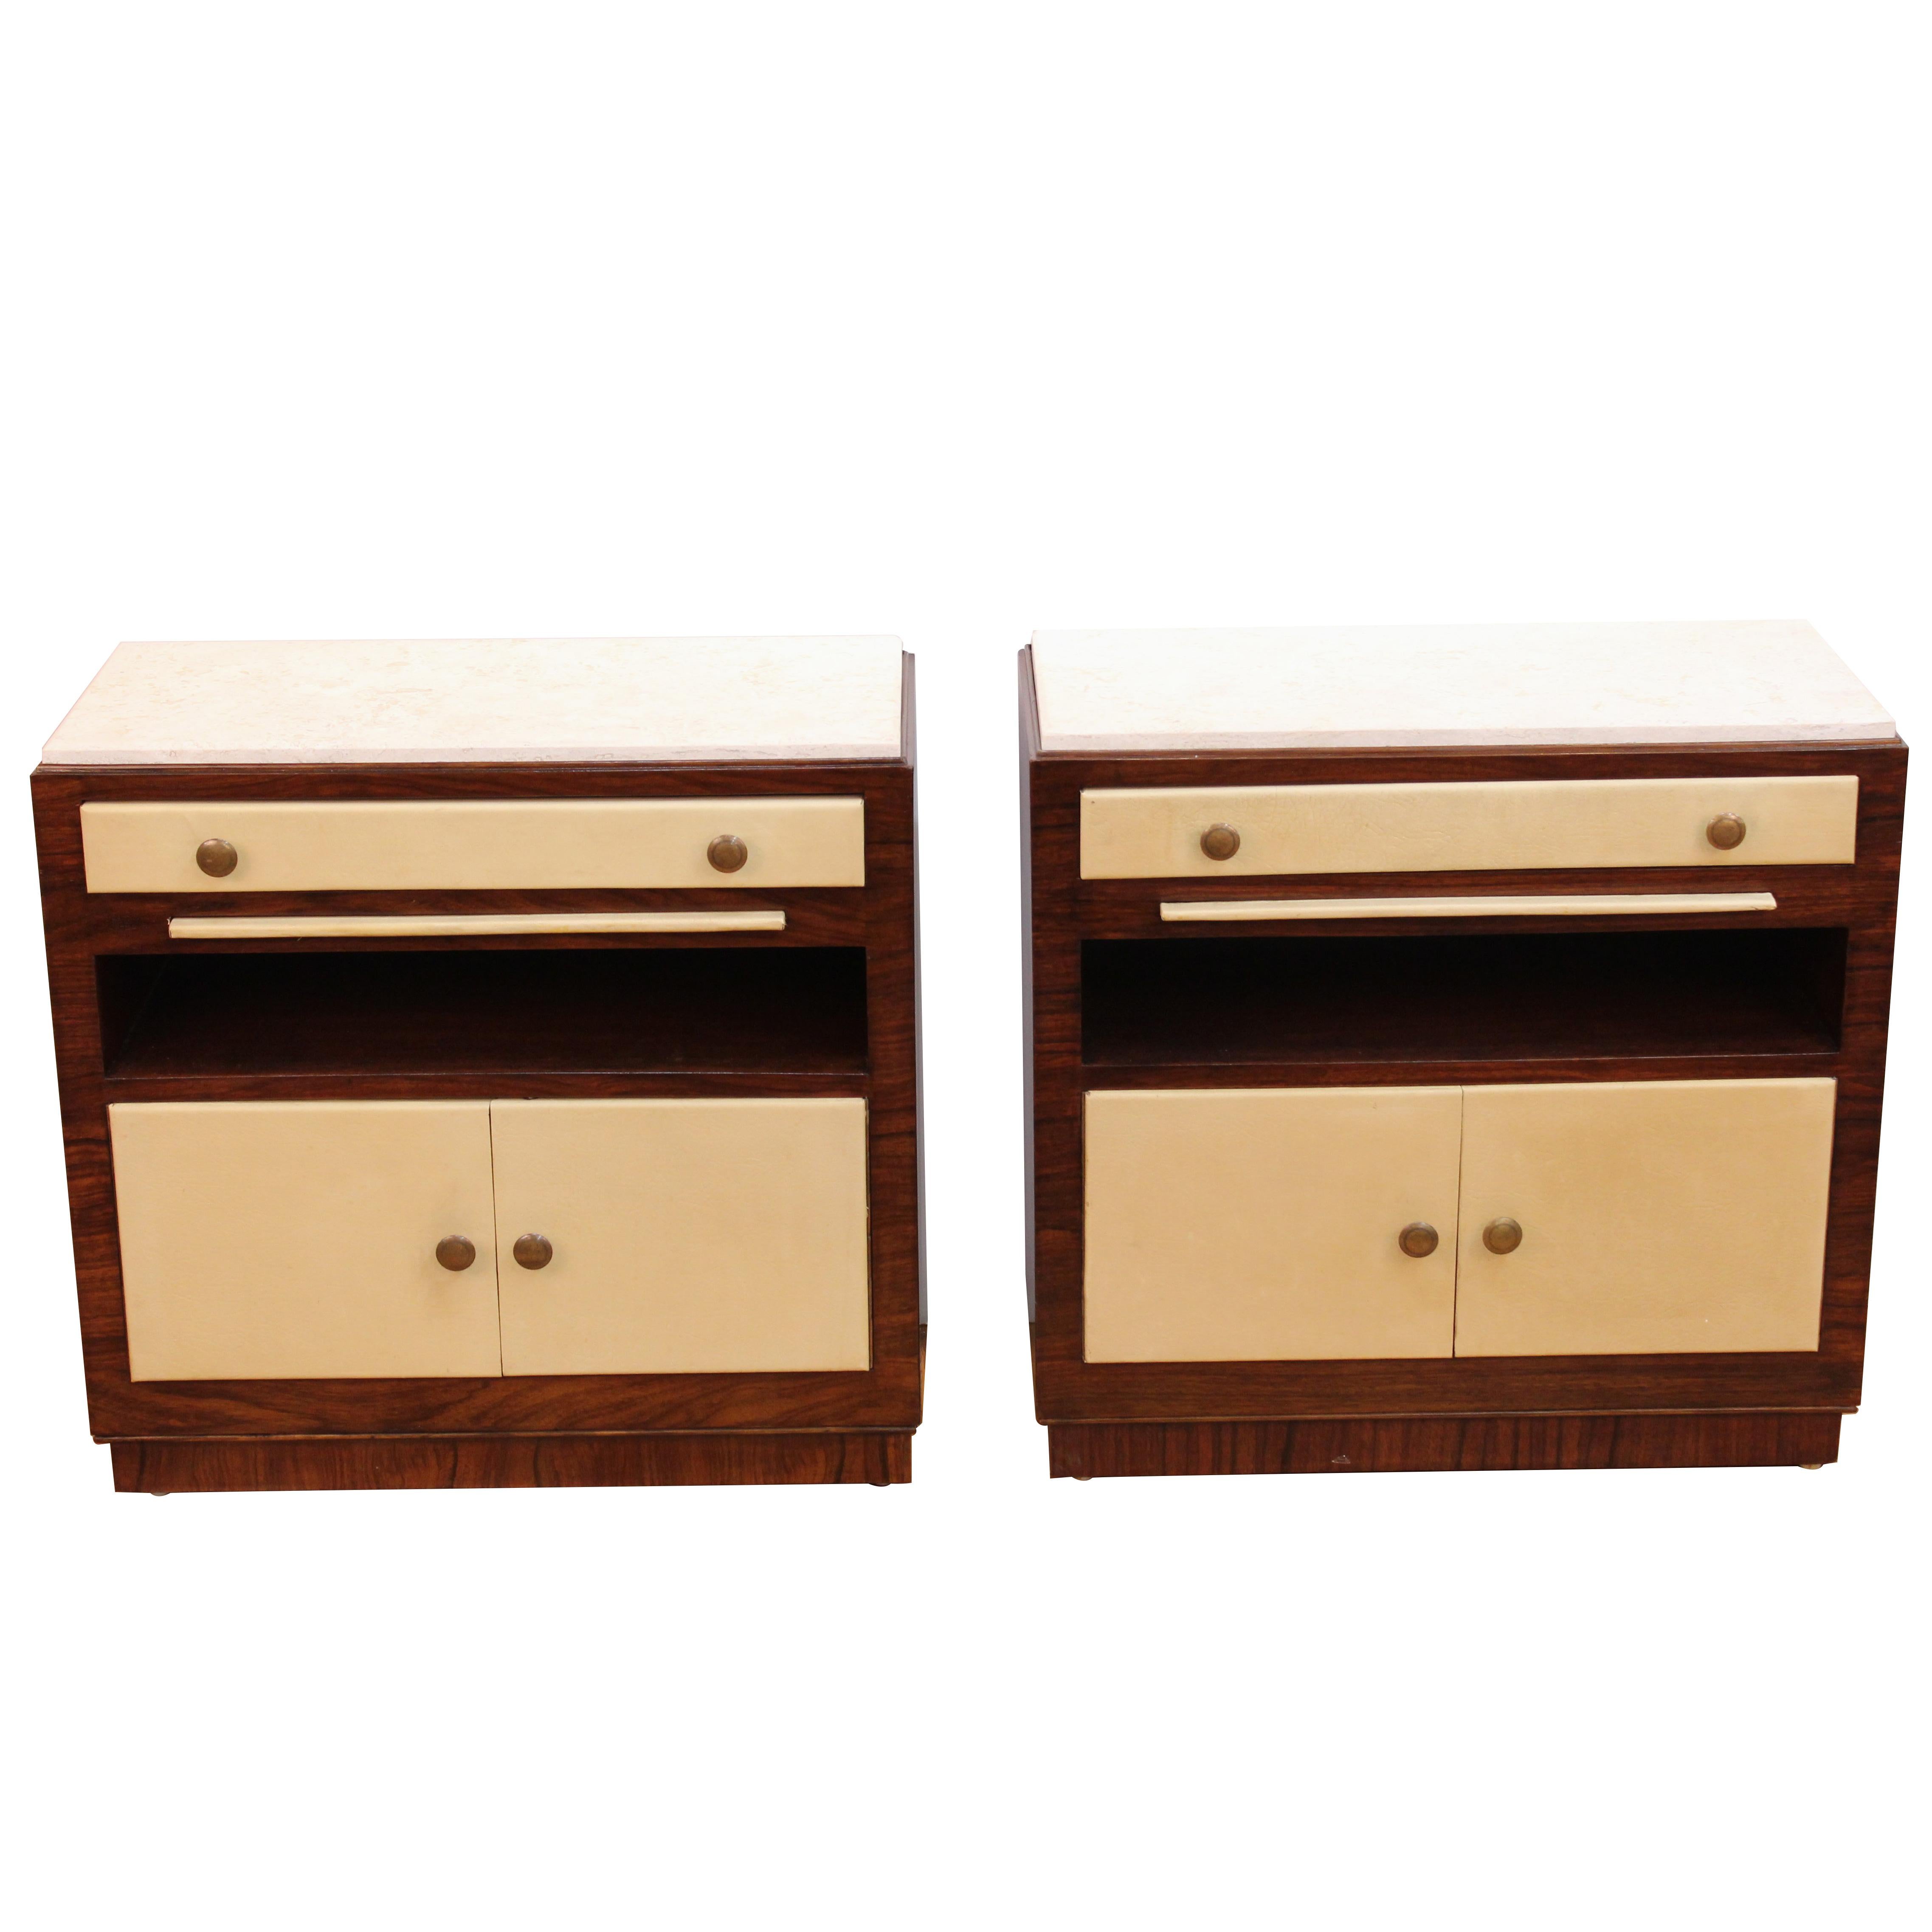 Pair of Art Deco Rosewood and Leather Nightstands with Marble Tops